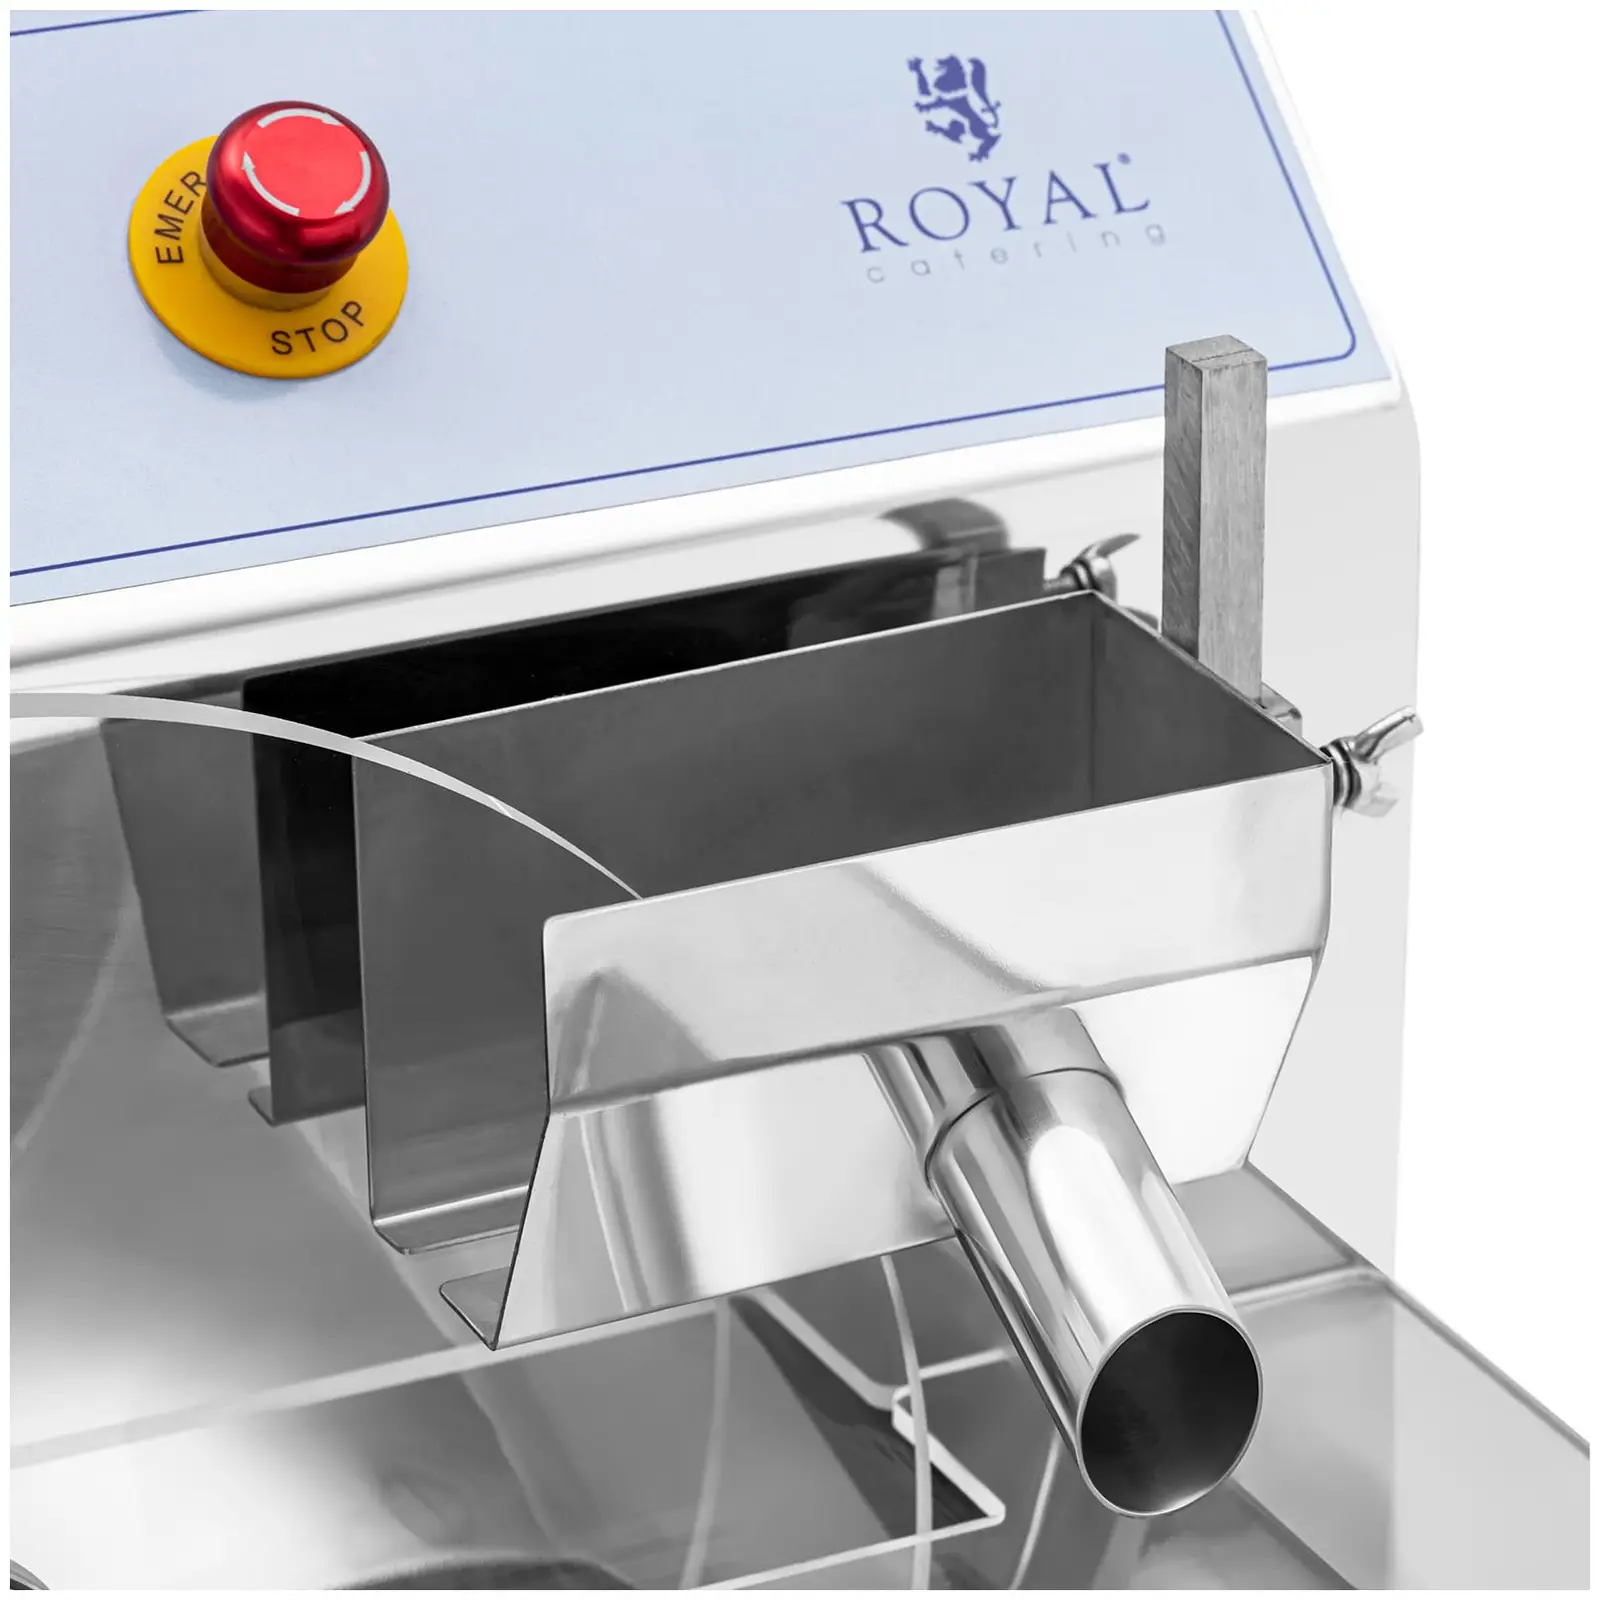 Factory second Chocolate Melting Pot - stainless steel - 960 W - 15 l - Royal Catering